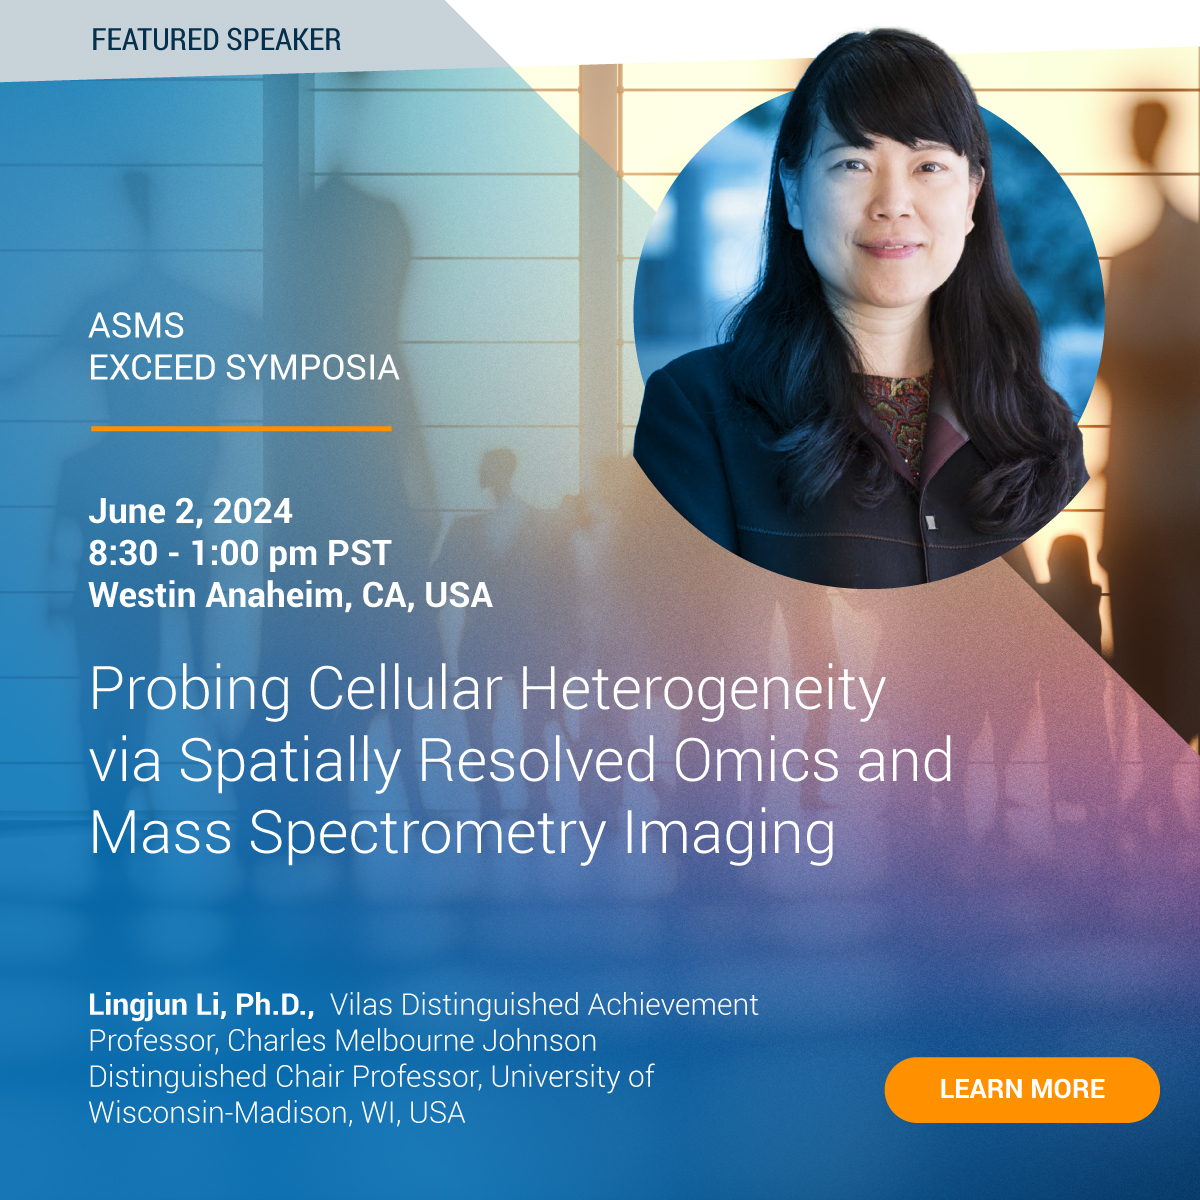 Lingjun Li joins Bruker's eXceed Symposia at ASMS. Discover cellular heterogeneity via spatial omics and MALDI imaging in her exciting talk. Sign up now to secure your free spot: goto.bruker.com/44ftC24 #asms2024 #MALDIimaging #spatialomics #cellbiology